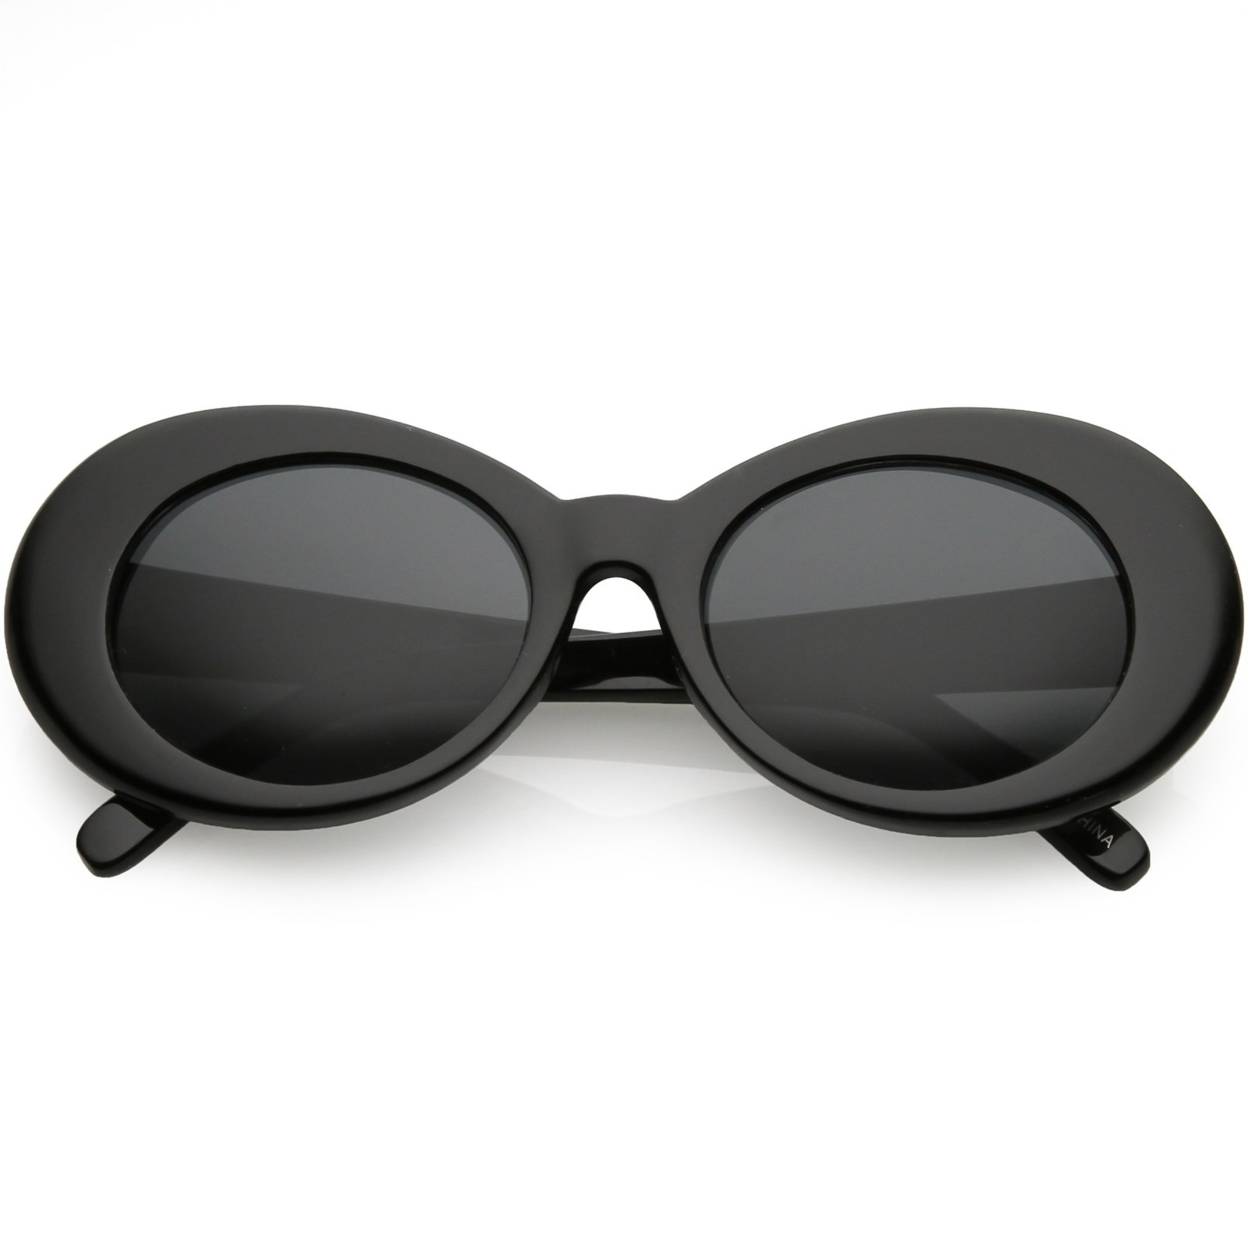 Large Retro Mod Oval Sunglasses Thick Frame Wide Arms Neutral Colored Lens 53mm - Black / Smoke